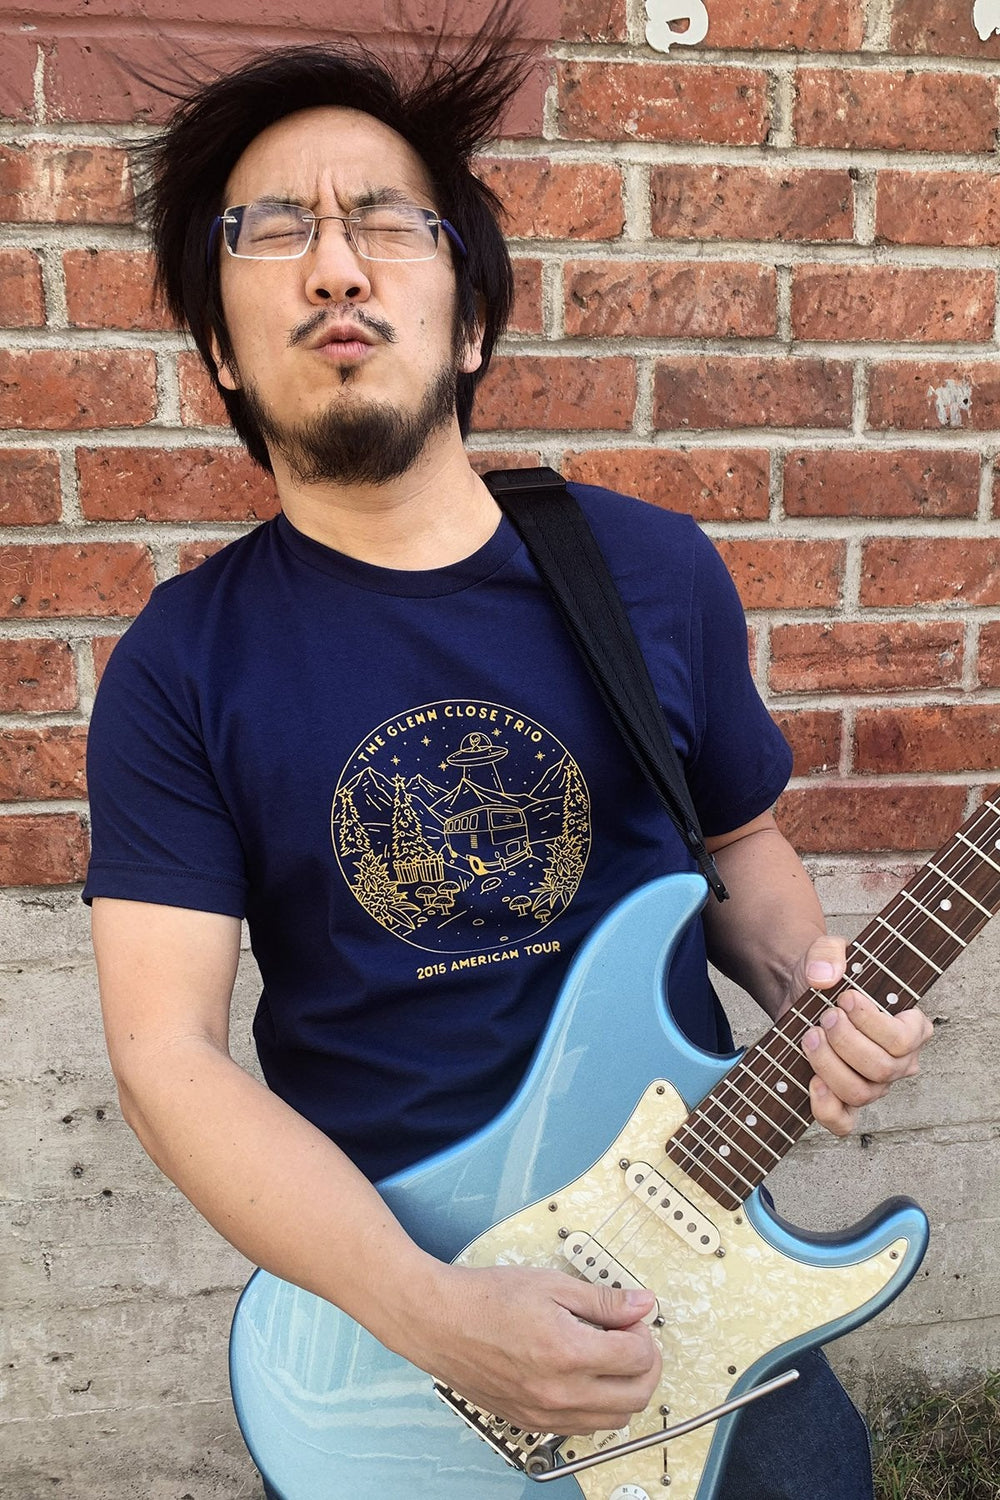 Freddie Wong wearing the t-shirt and playing a light blue electric guitar in front of a brick wall.